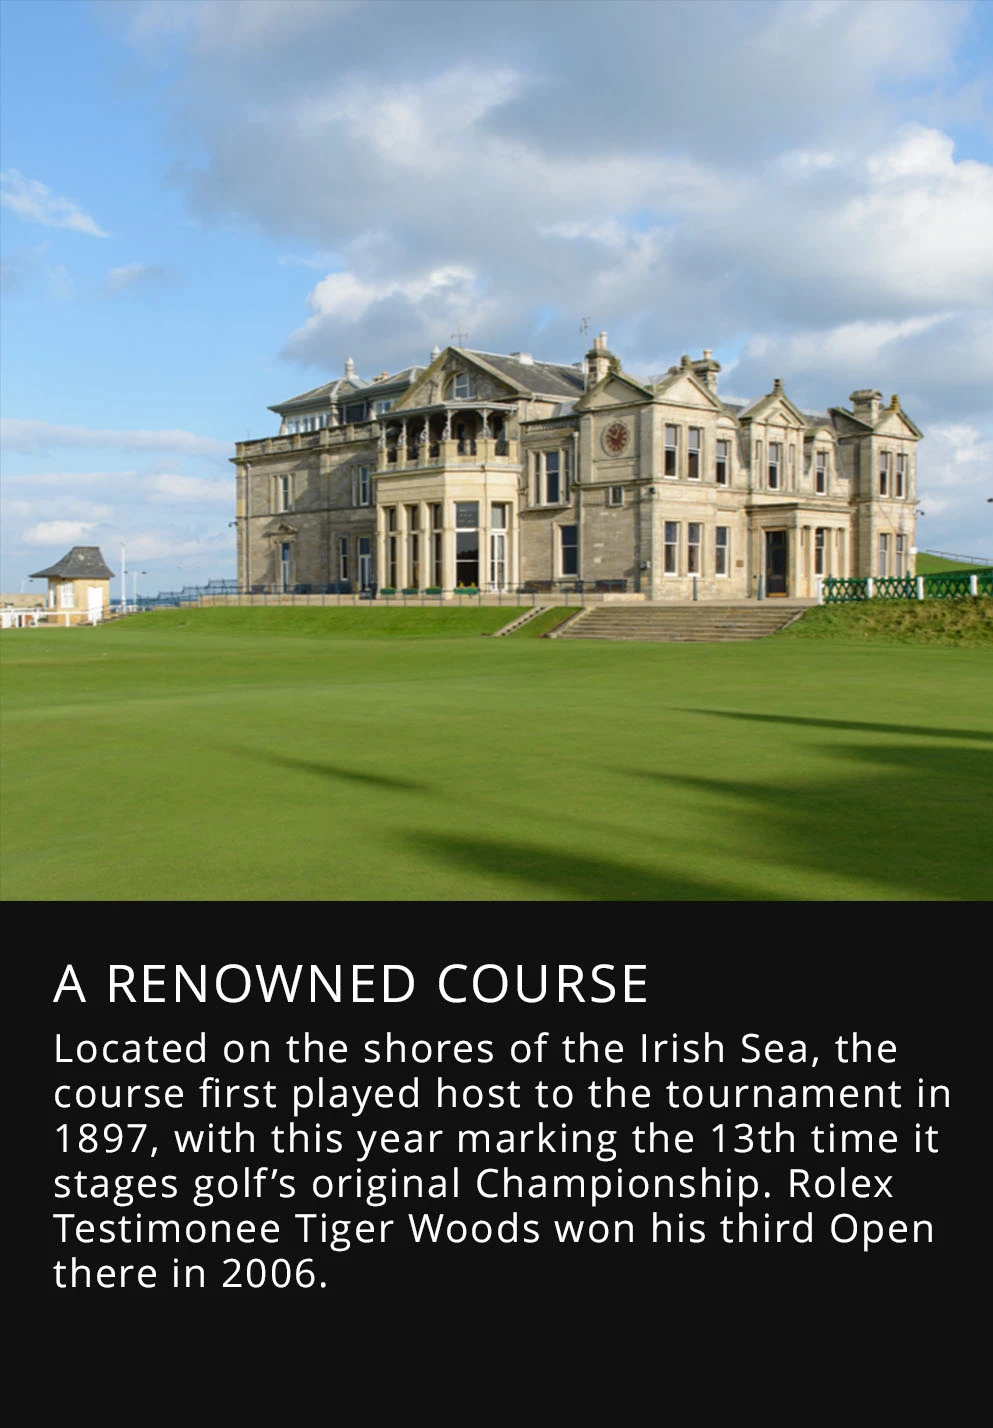 Located on the shores of the Irish Sea, the course first played host to the tournament in 1897